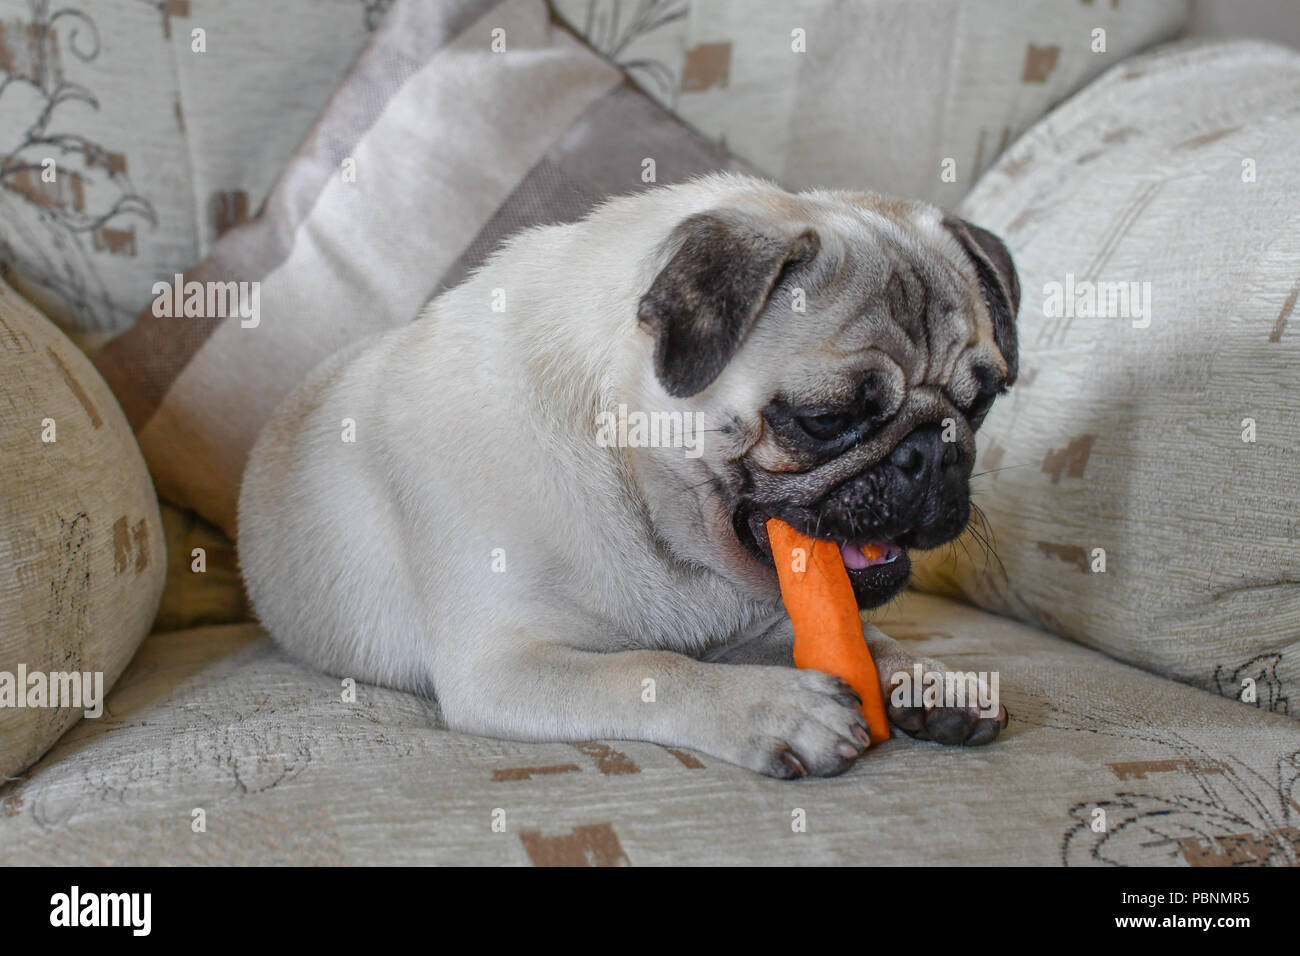 Cute Pug Dog Sitting On A Chair Eating A Carrot Diet Stock Photo